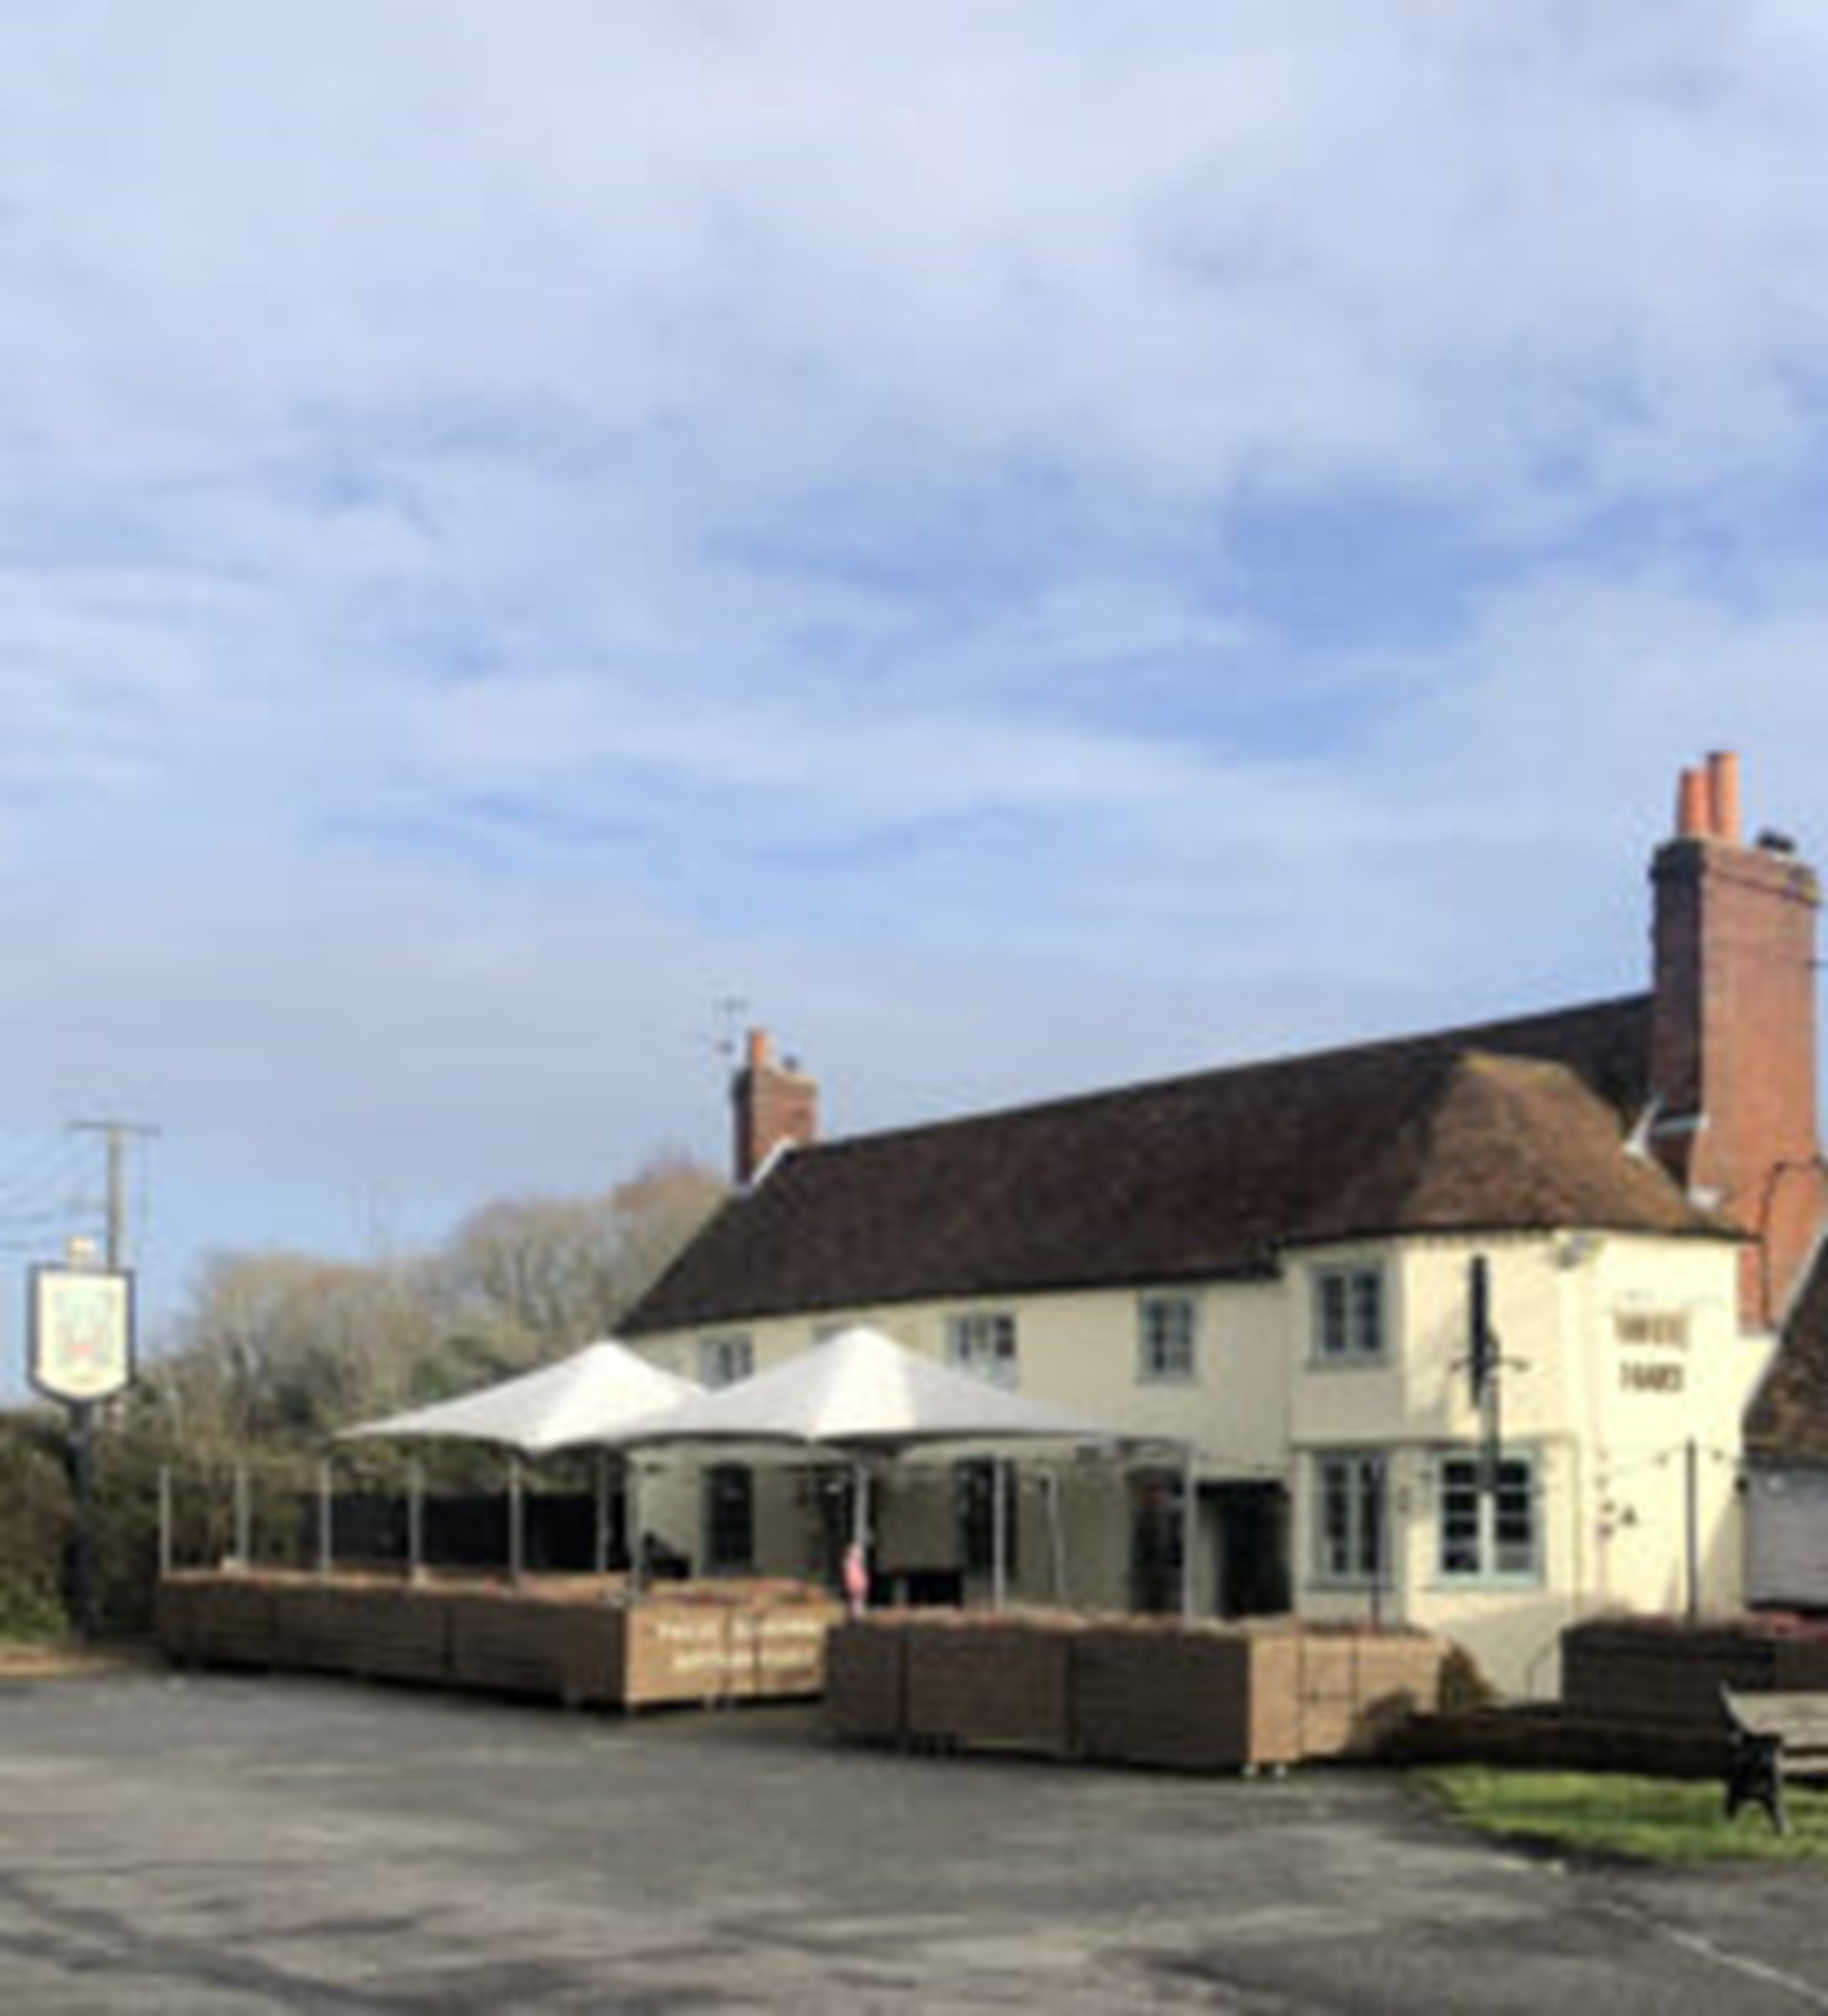 A picture of the White Hart public house in Sherfield on Loddon